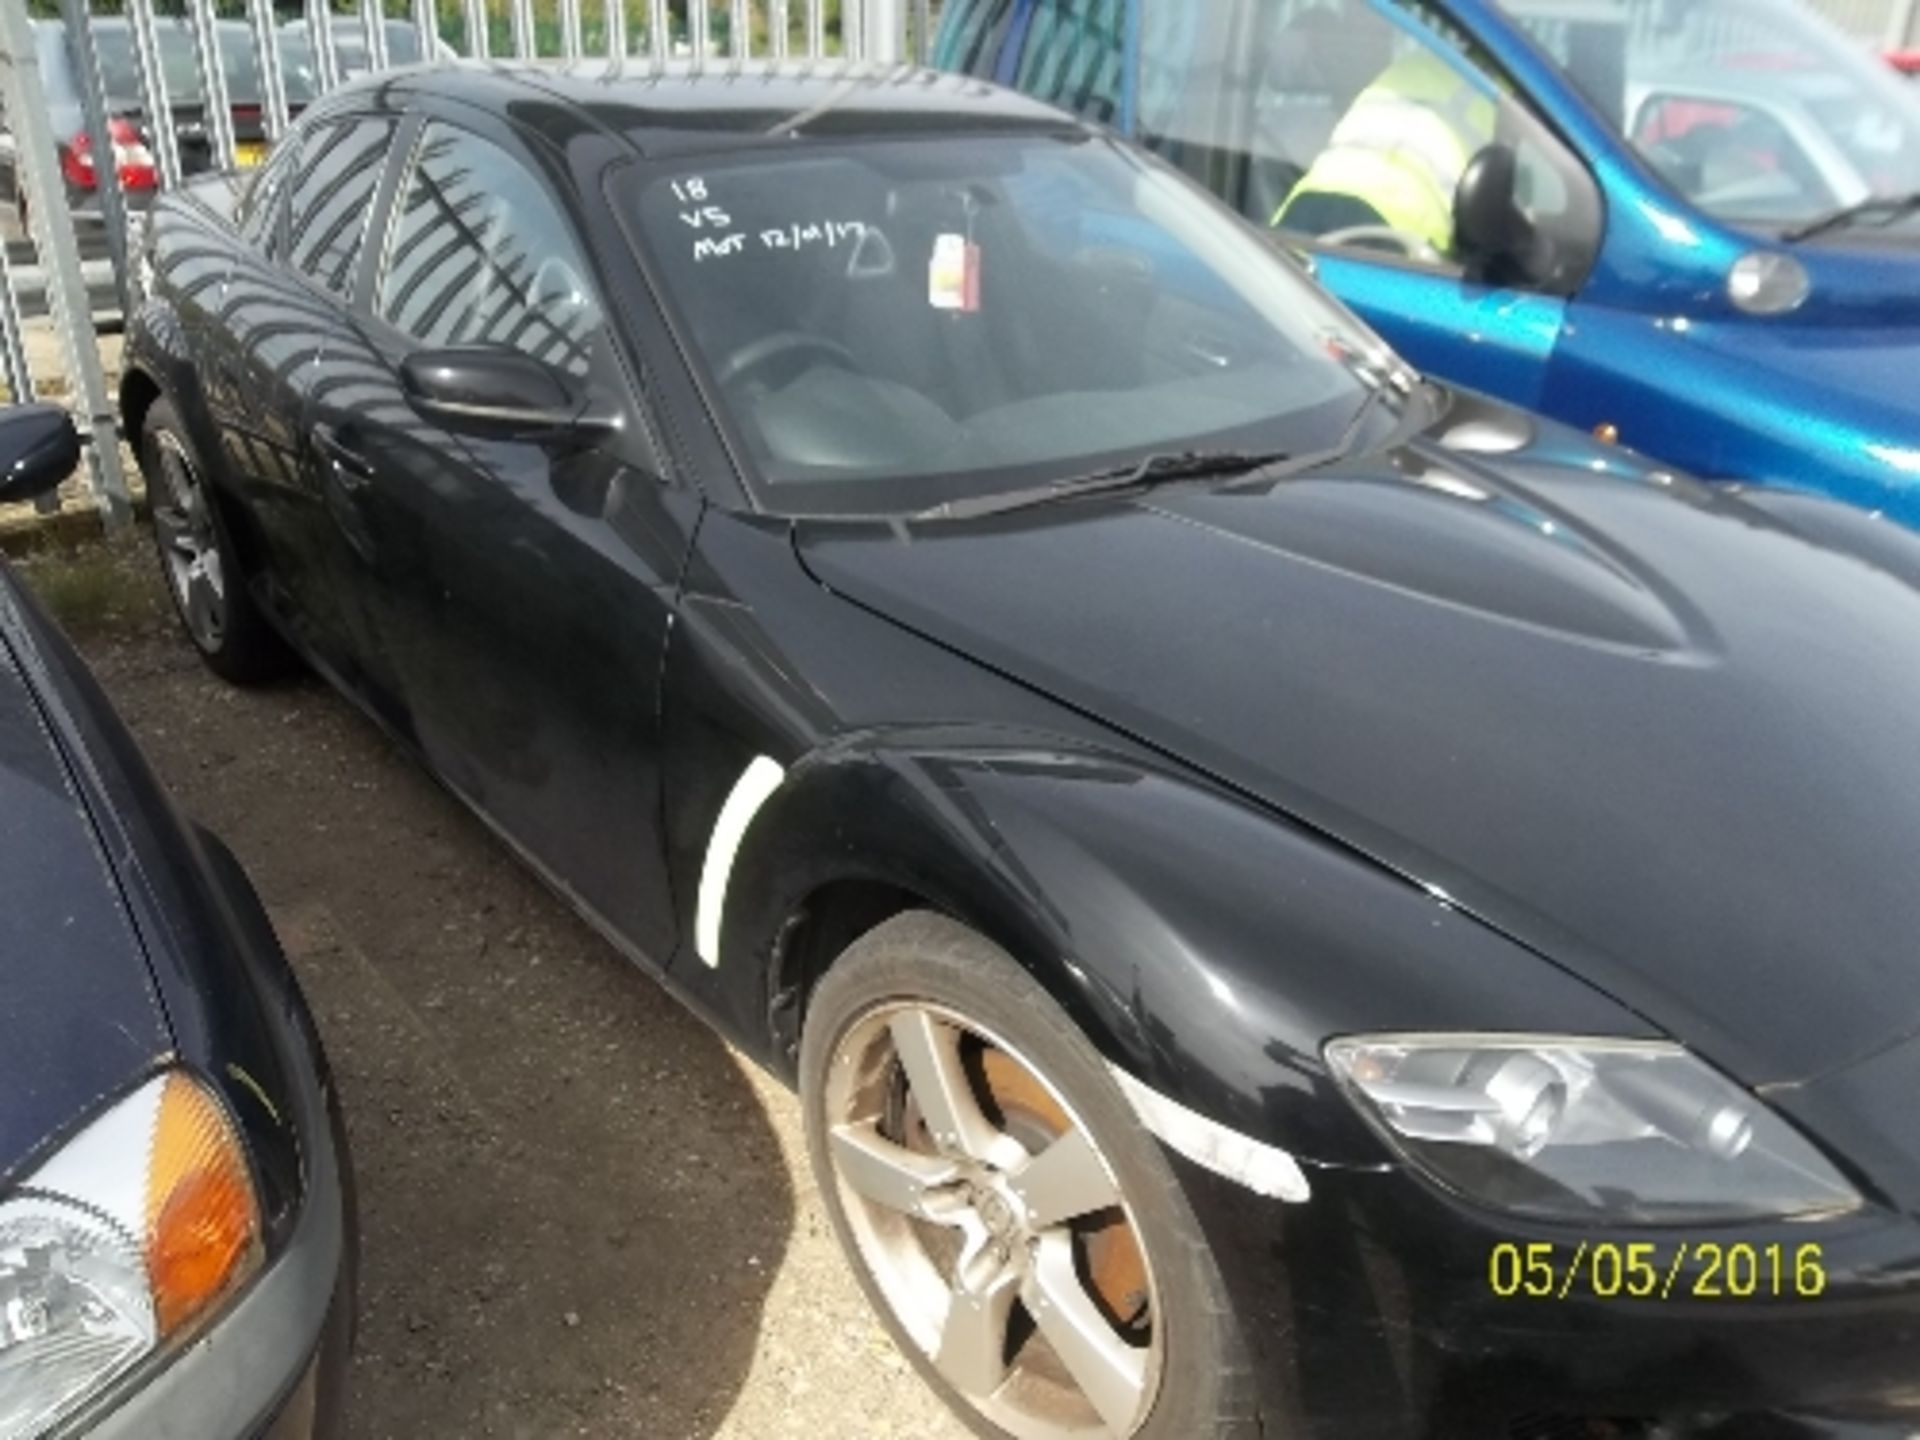 Mazda RX-8 192 PS Coupe - SD07 JCJ Date of registration: 28.03.2007 2616cc, petrol, manual, black - Image 2 of 4